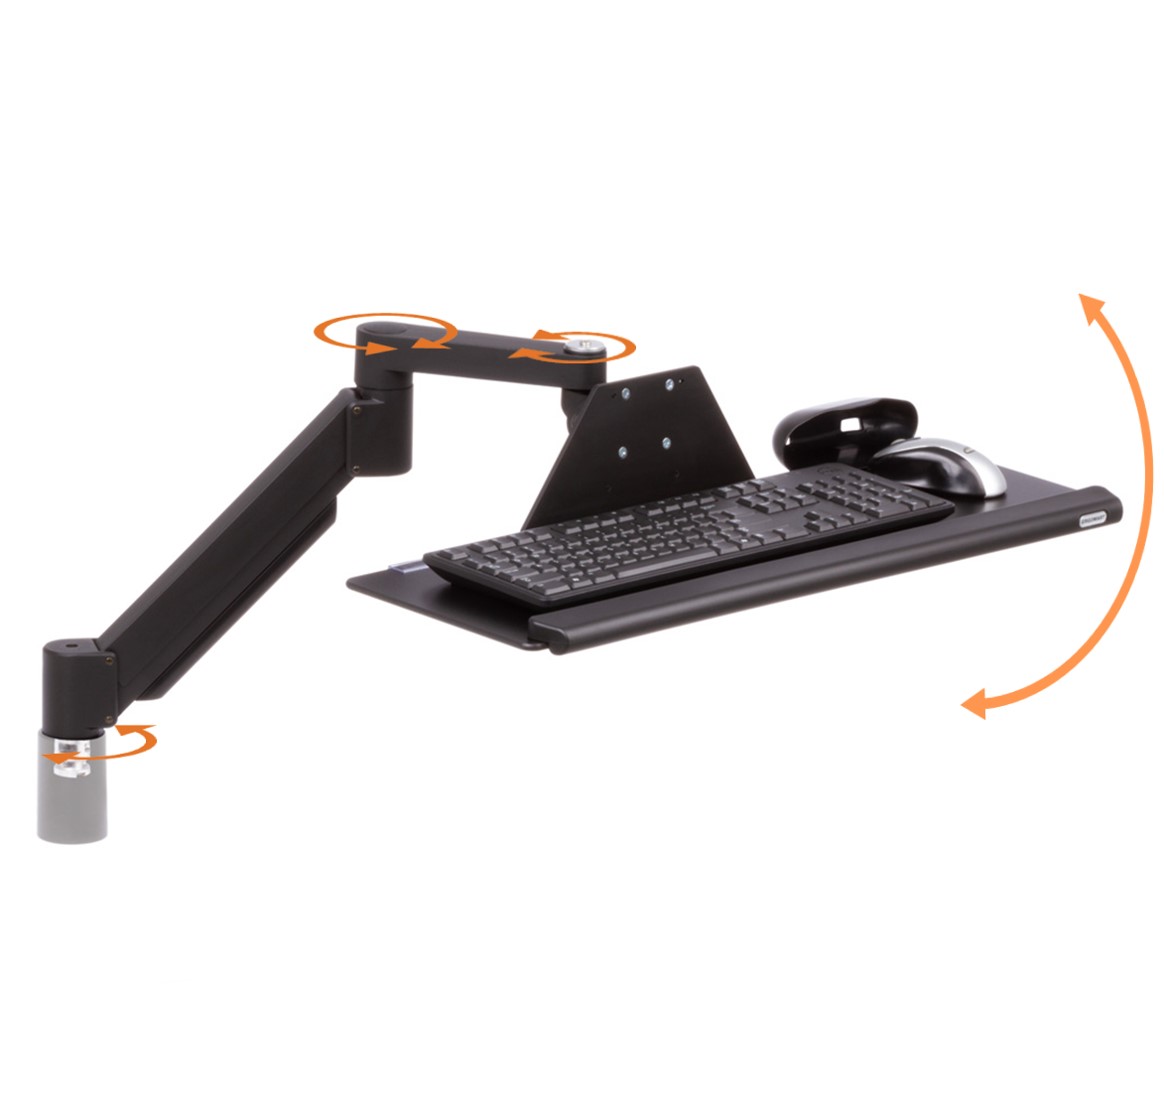 TRS7000AKP keyboard arm articulation shown with adjustment arrows from an isometric view